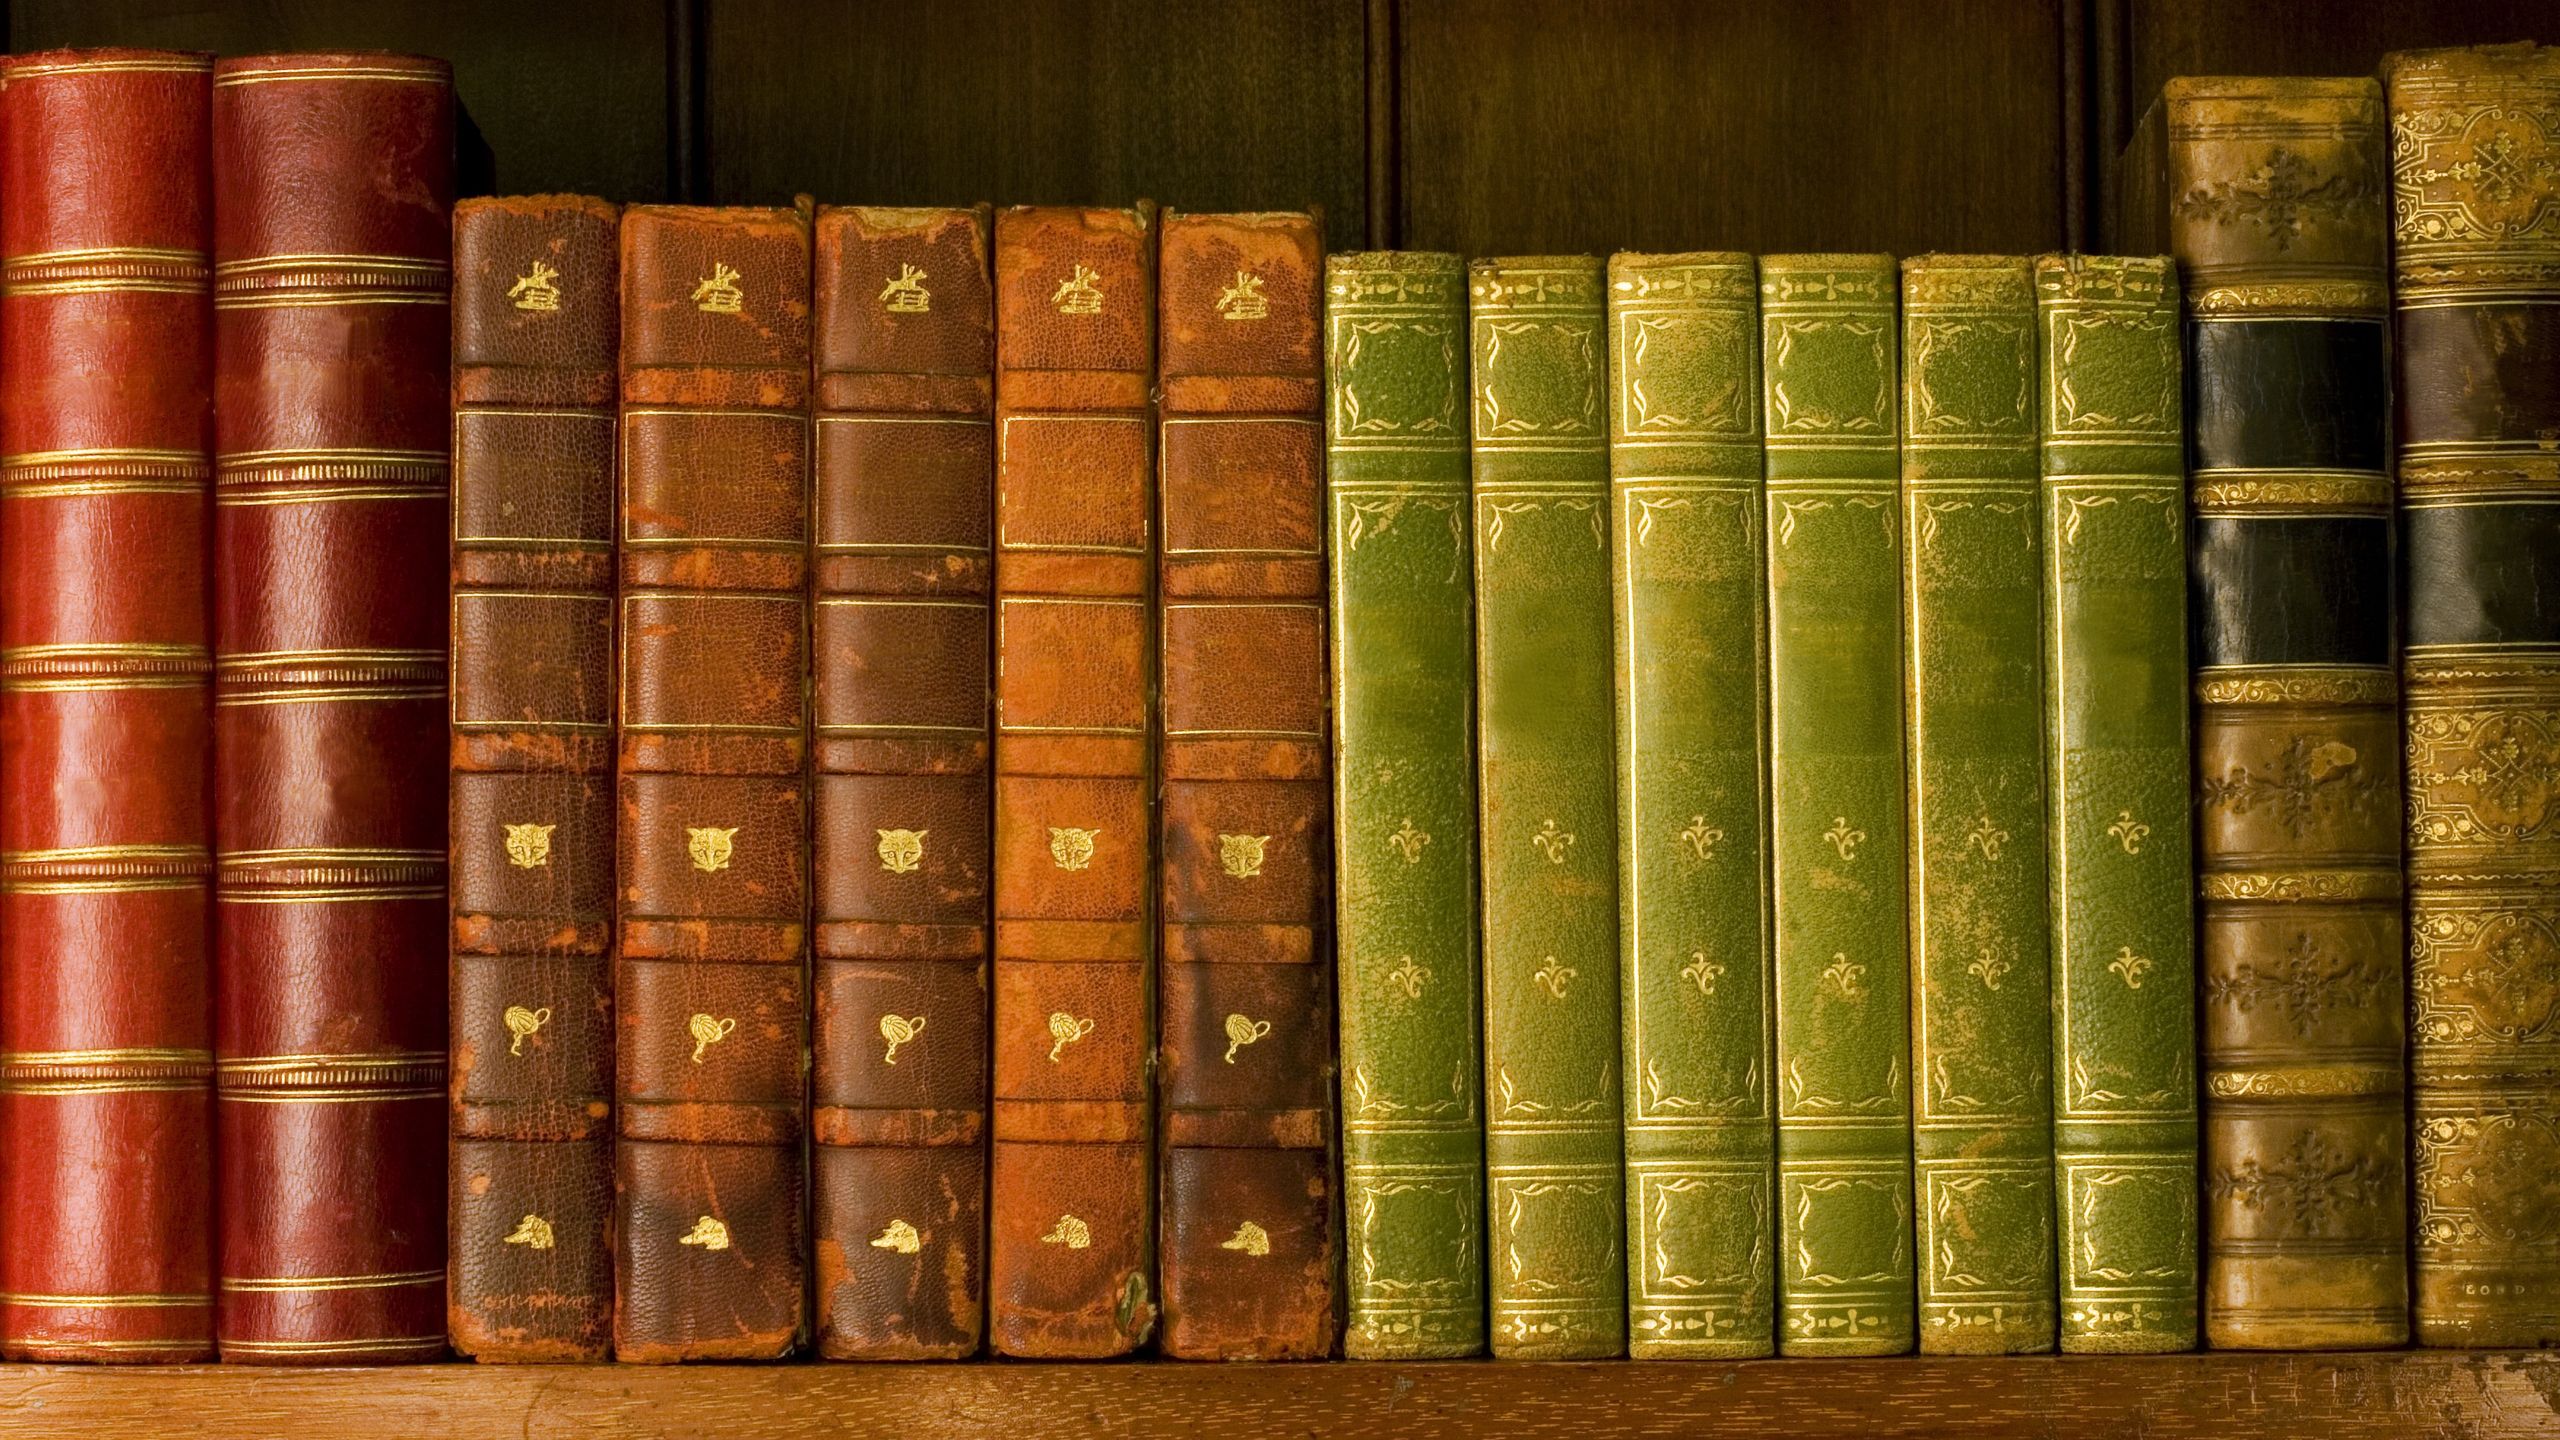 Download wallpaper 2560x1440 shelf, library, roots, books